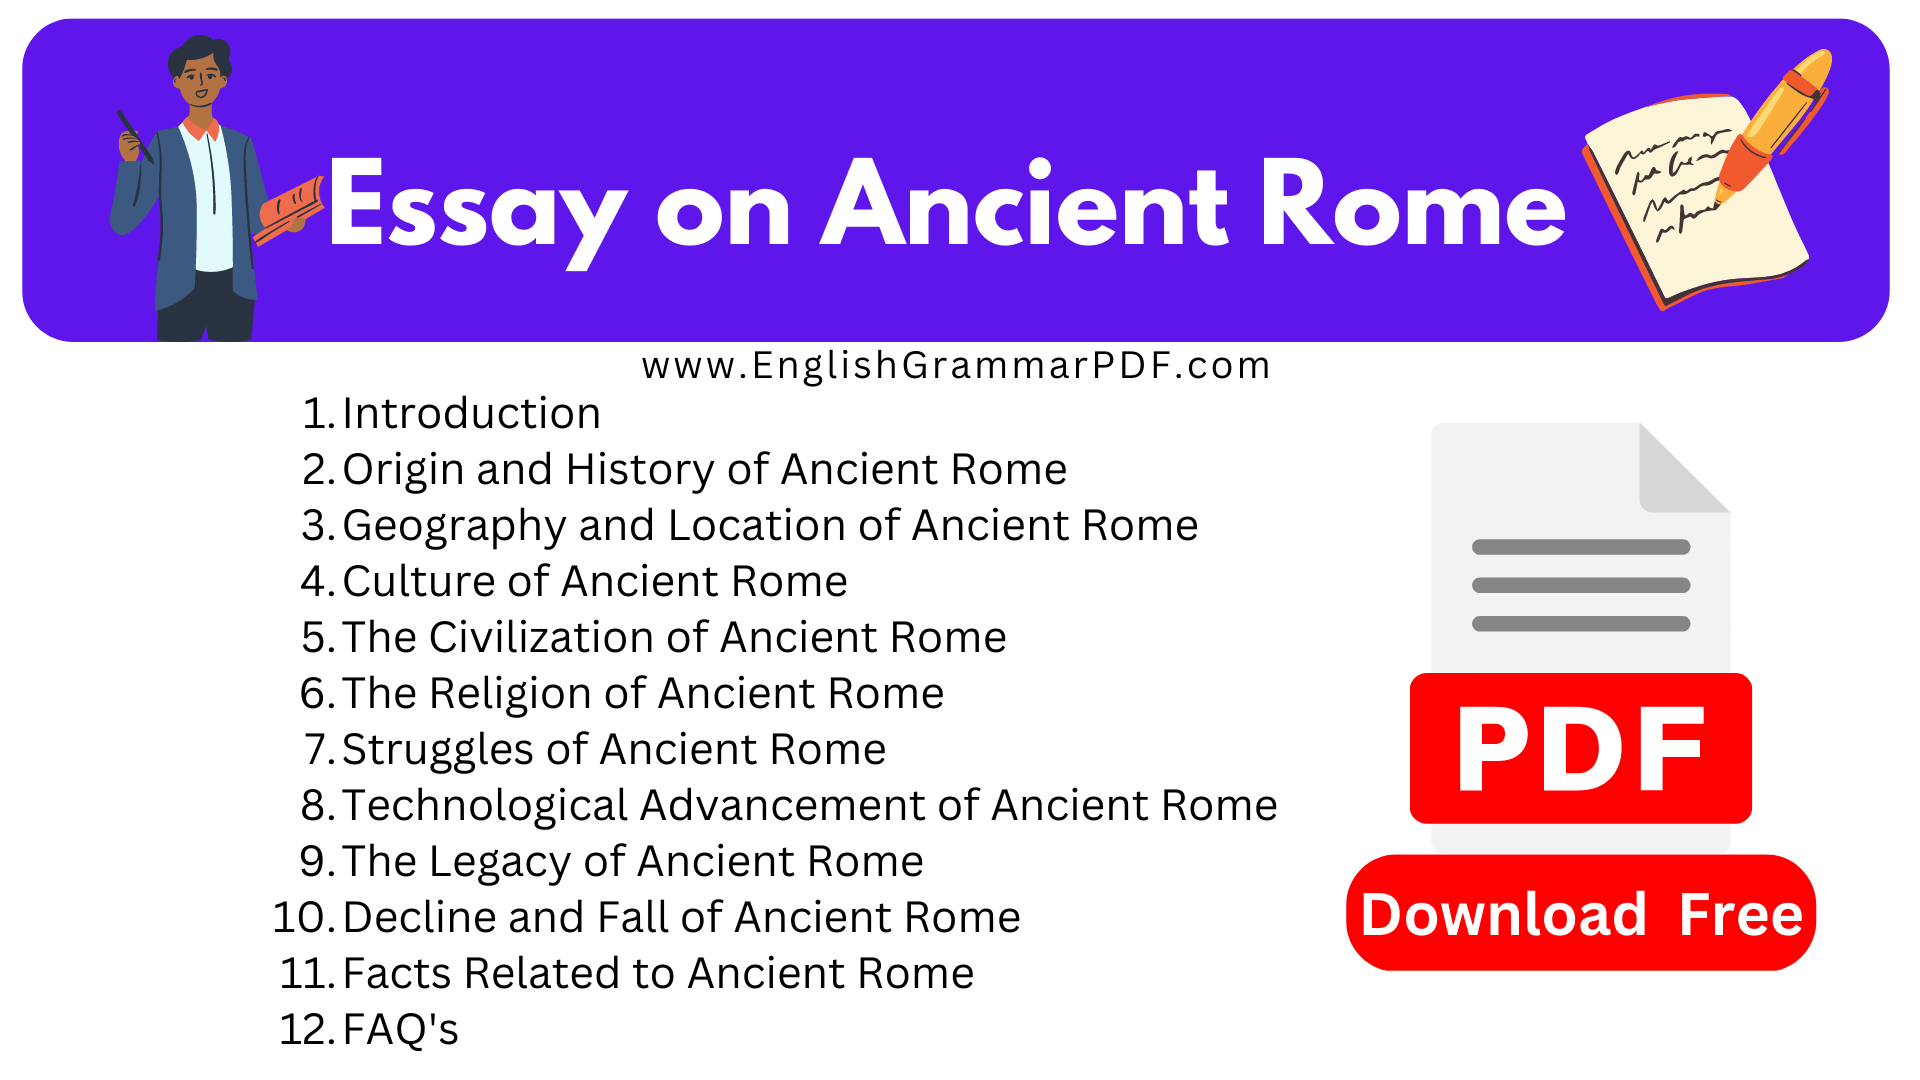 Essay on Ancient Rome